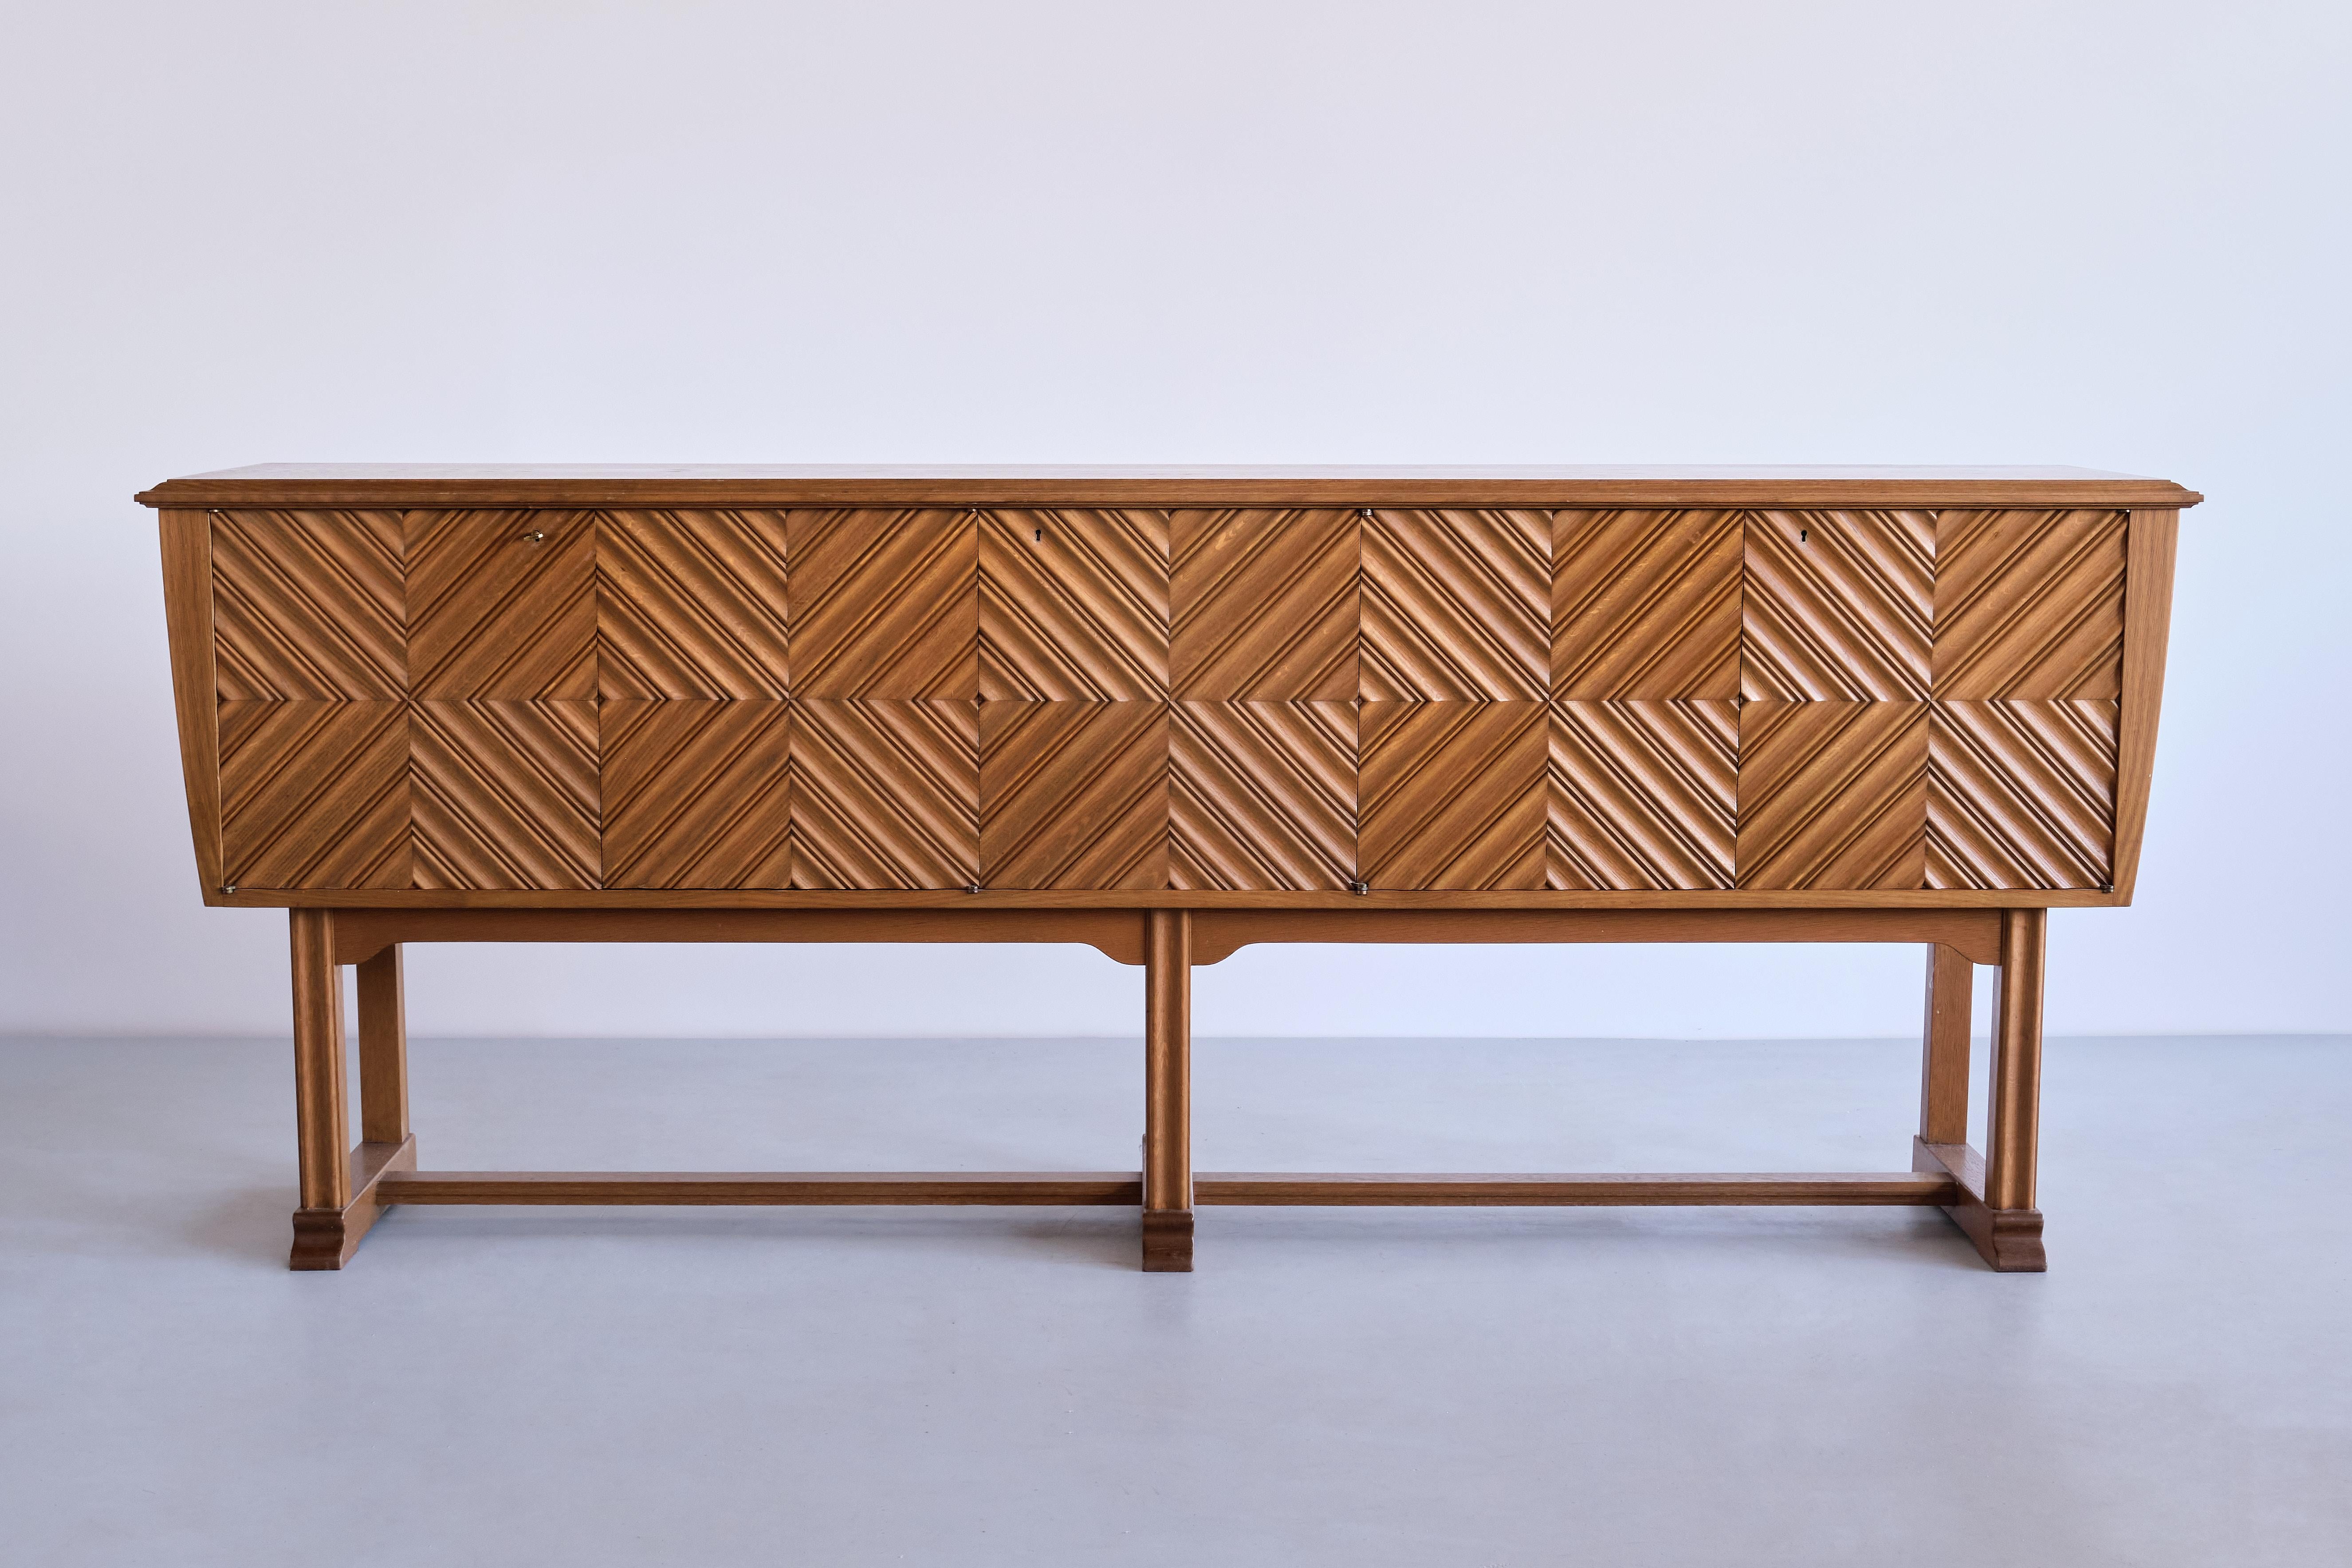 This exceptional sideboard was designed by Ludvig Sturm and produced by Inrednings-Kompaniet AB in Malmö, Sweden in 1948. 

The sideboard is entirely made of solid oak wood. The exterior is composed of five doors, each panelled with four squares of